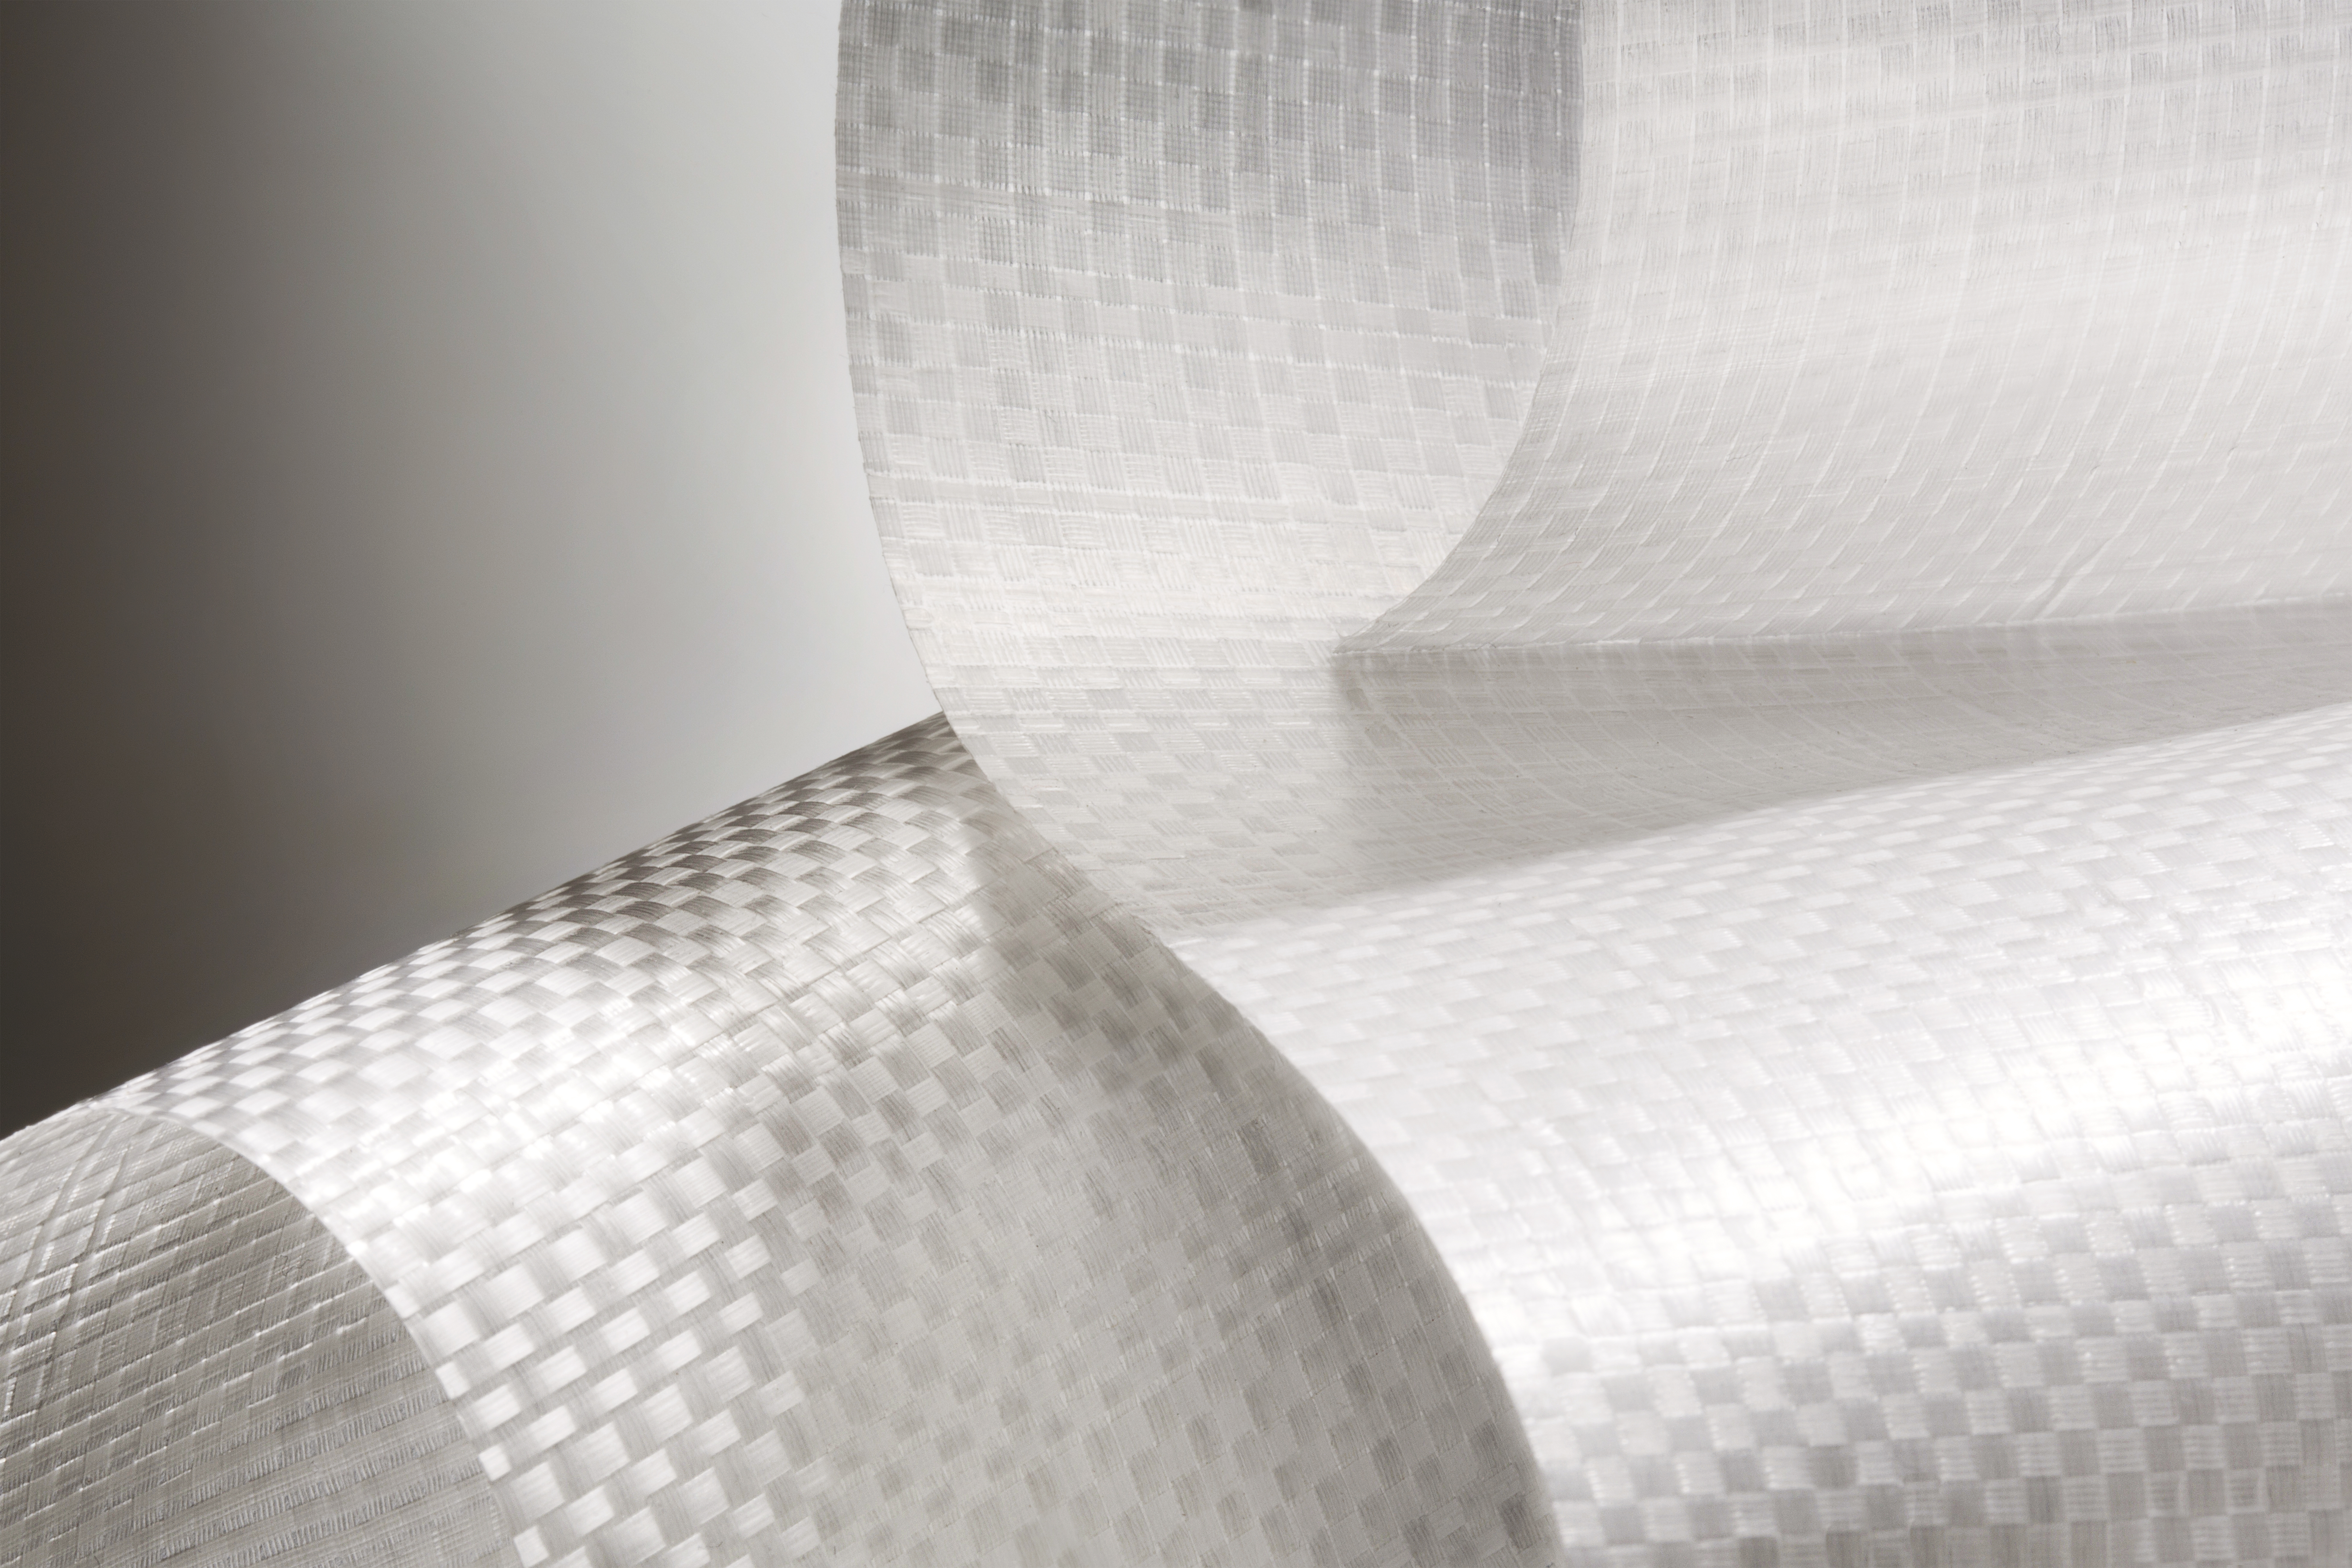 Industrial Fabrics for Woven Packaging